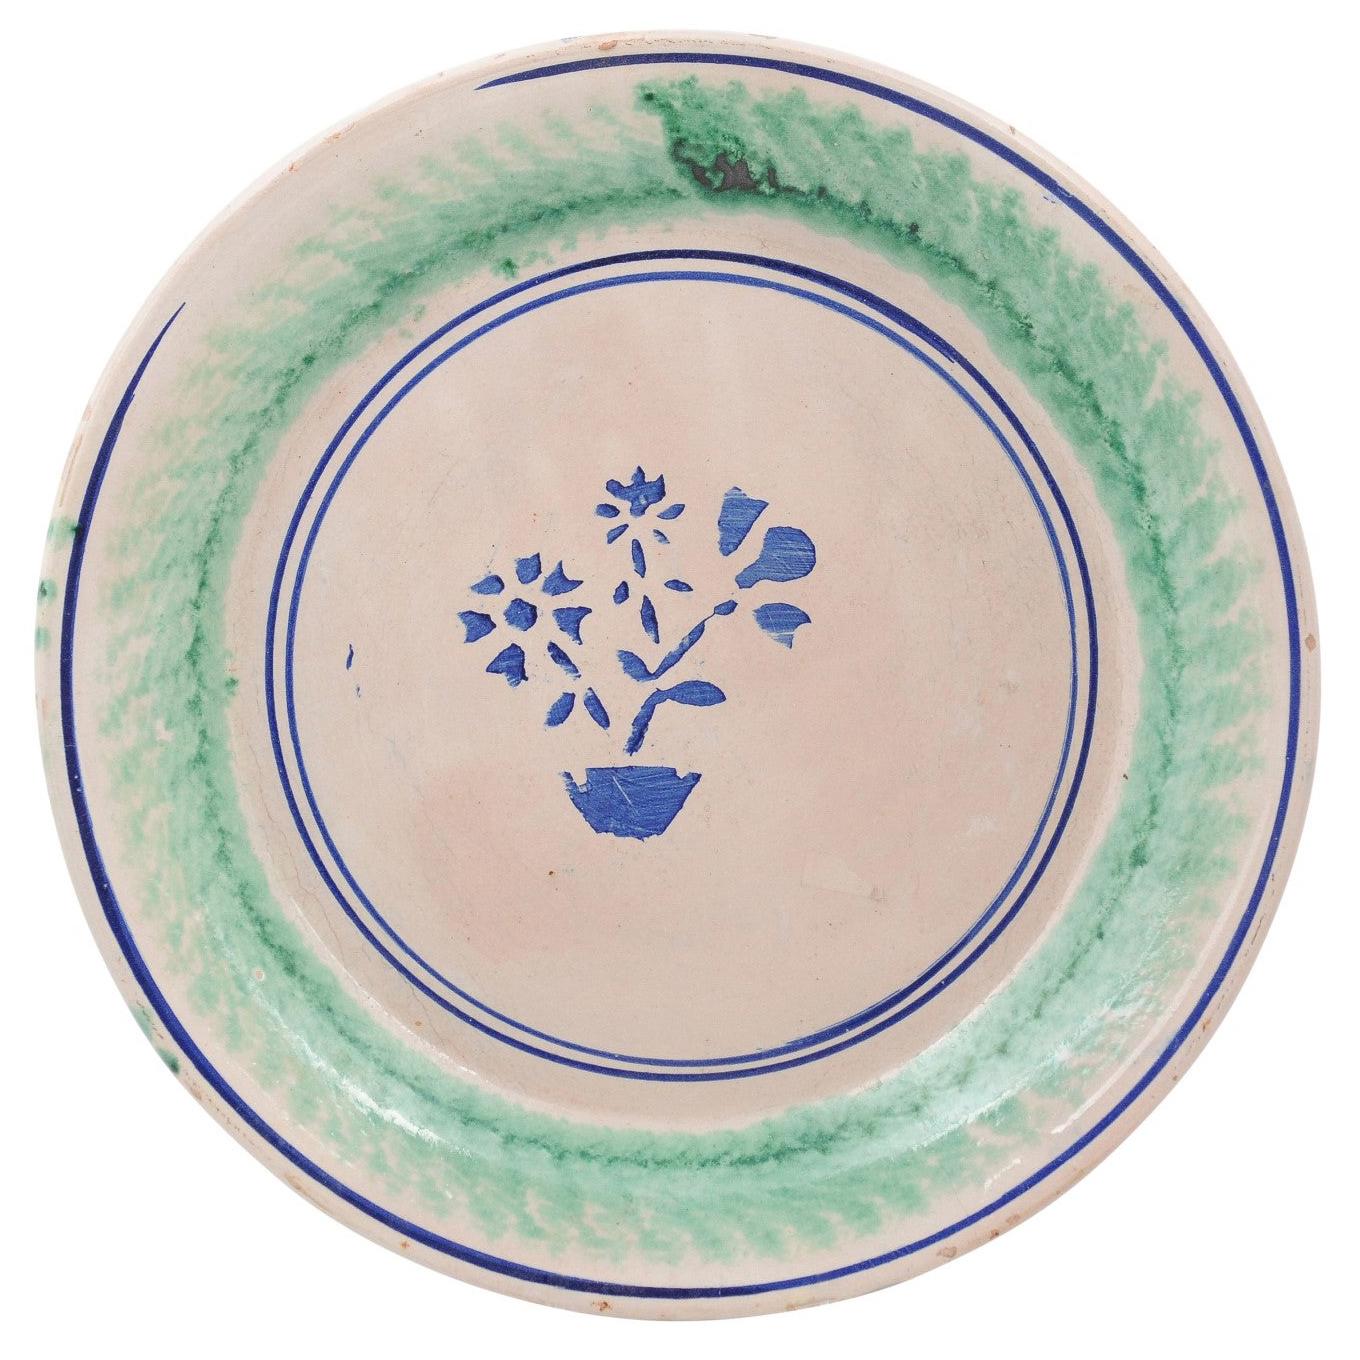 Italian 1895s Pottery Platter with Stylized Floral Motifs and Green Accents